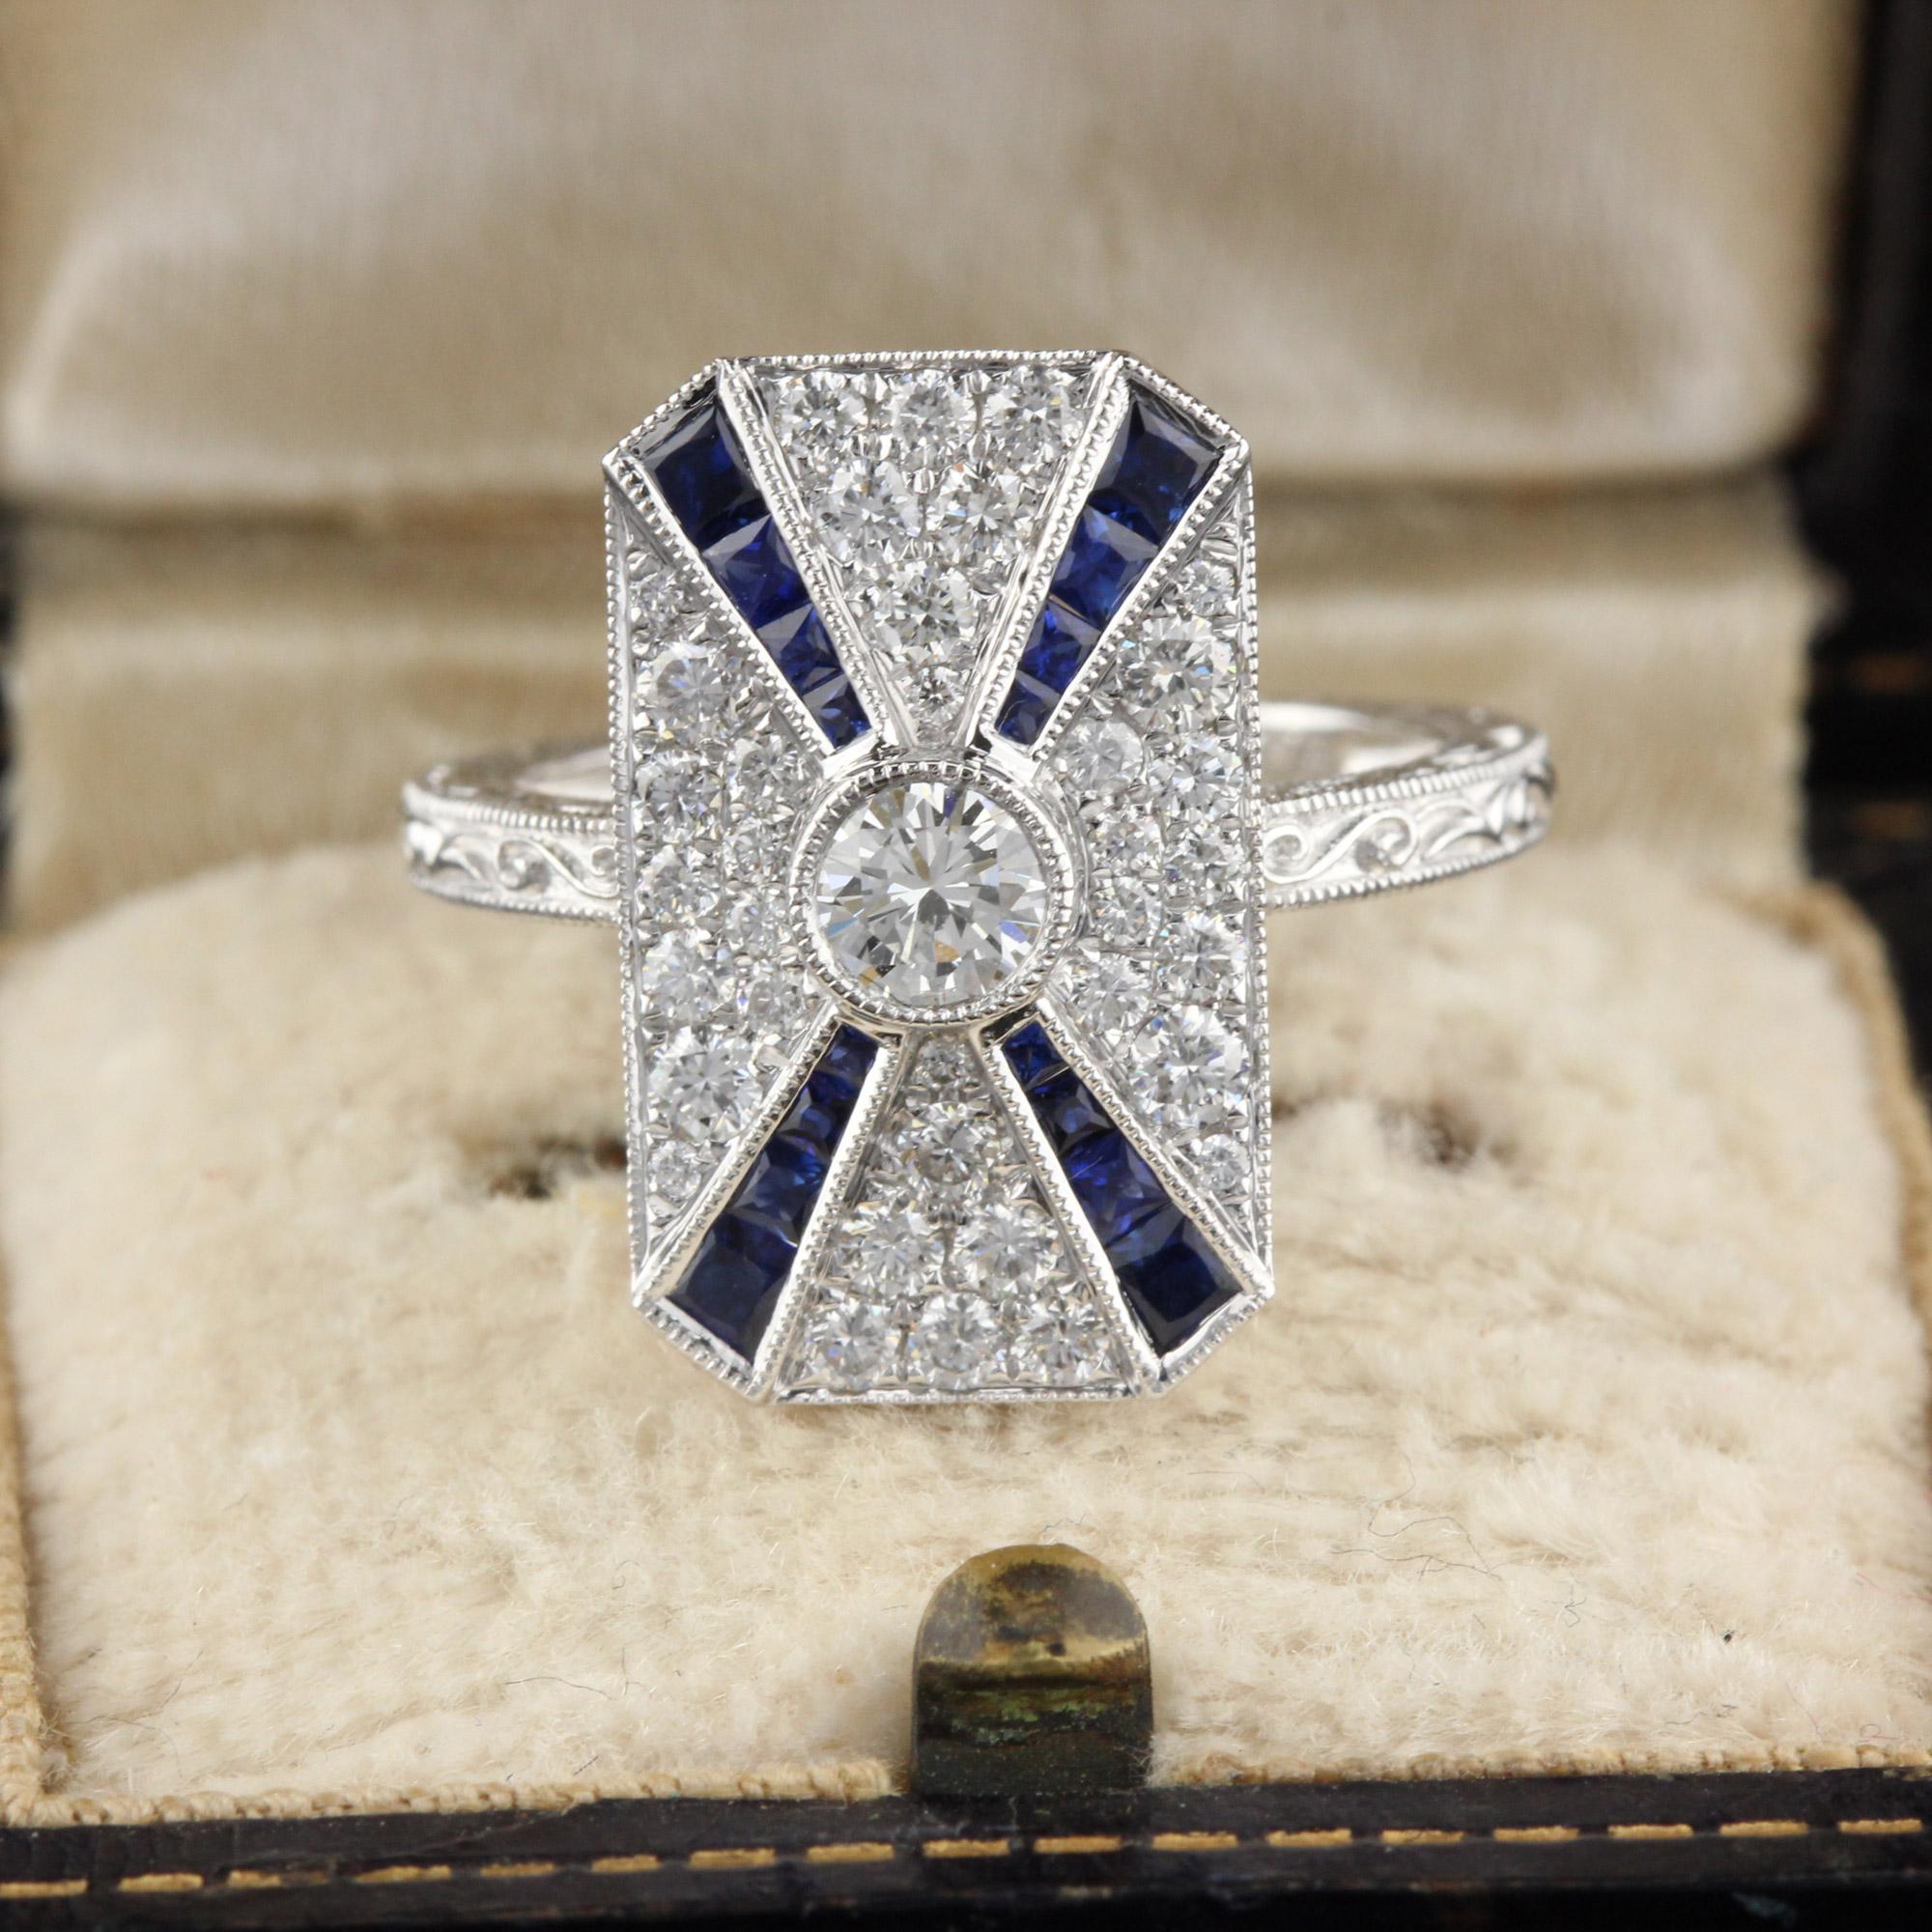 Beautiful Art Deco style ring in 18K White Gold with diamonds and channel set natural sapphires! This ring is hand engraved and mil-grained. 

#R0066

Metal: 18K White Gold

Center Diamond Weight: 0.25 cts 

Total Diamond Weight: 0.89cts

Diamond